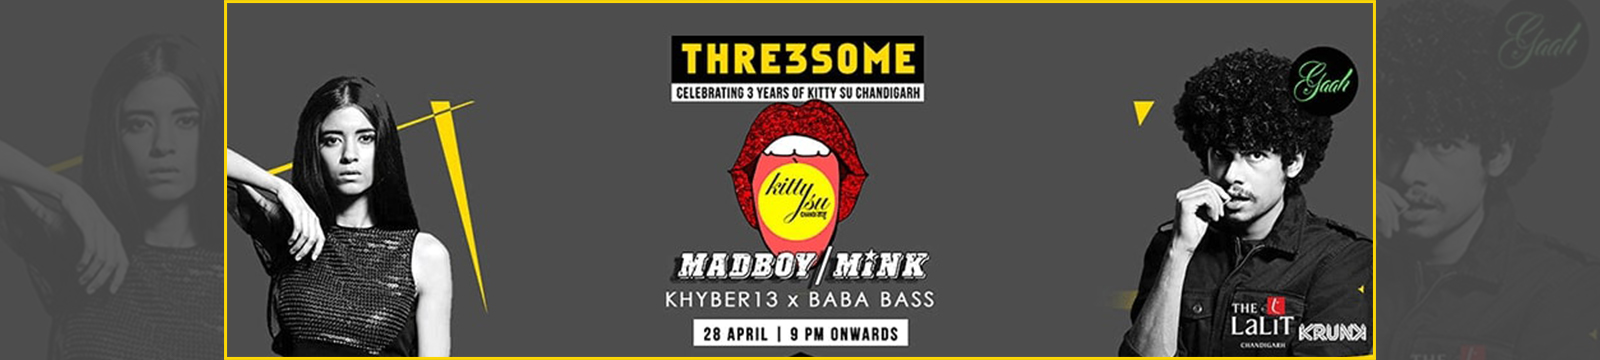 Thre3some – An Evening Dedicated to 3 Years of Kitty Su